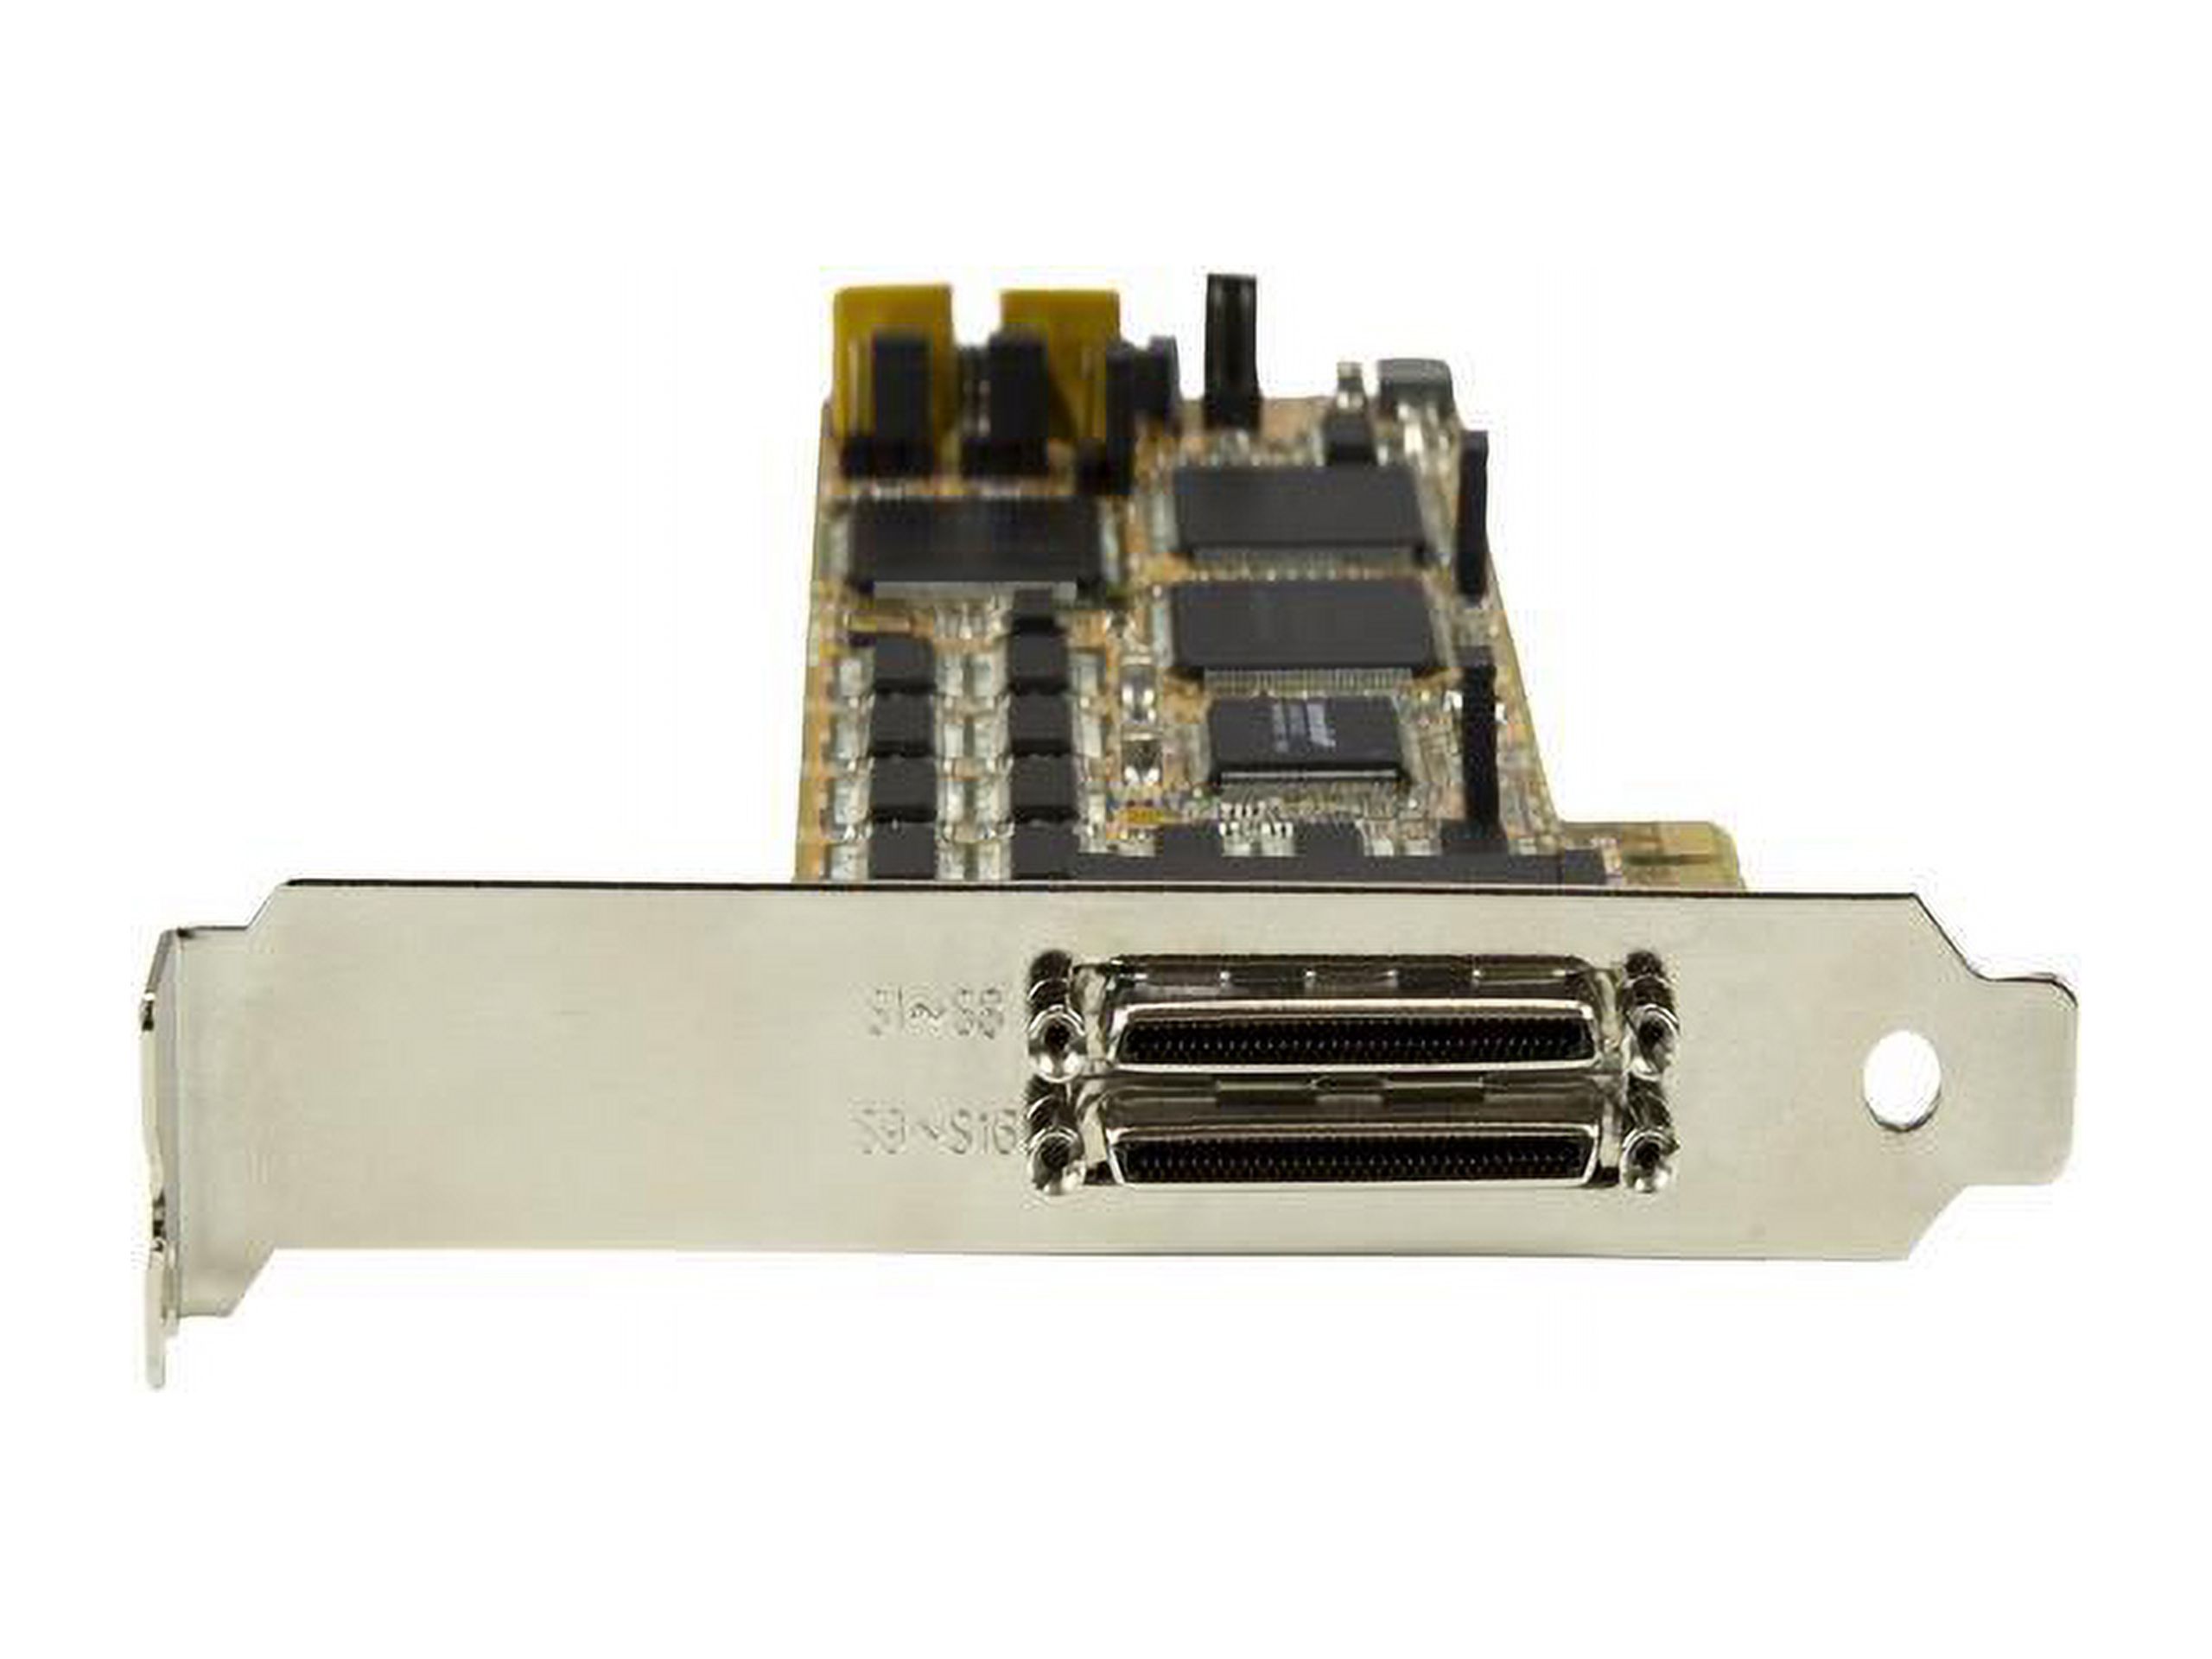 StarTech PEX16S550LP PCI Express Serial Card - 16 Port Low-Profile Serial Card - High-Speed PCIe Serial Adapter - Serial Controller DB9 RS232 - image 5 of 6